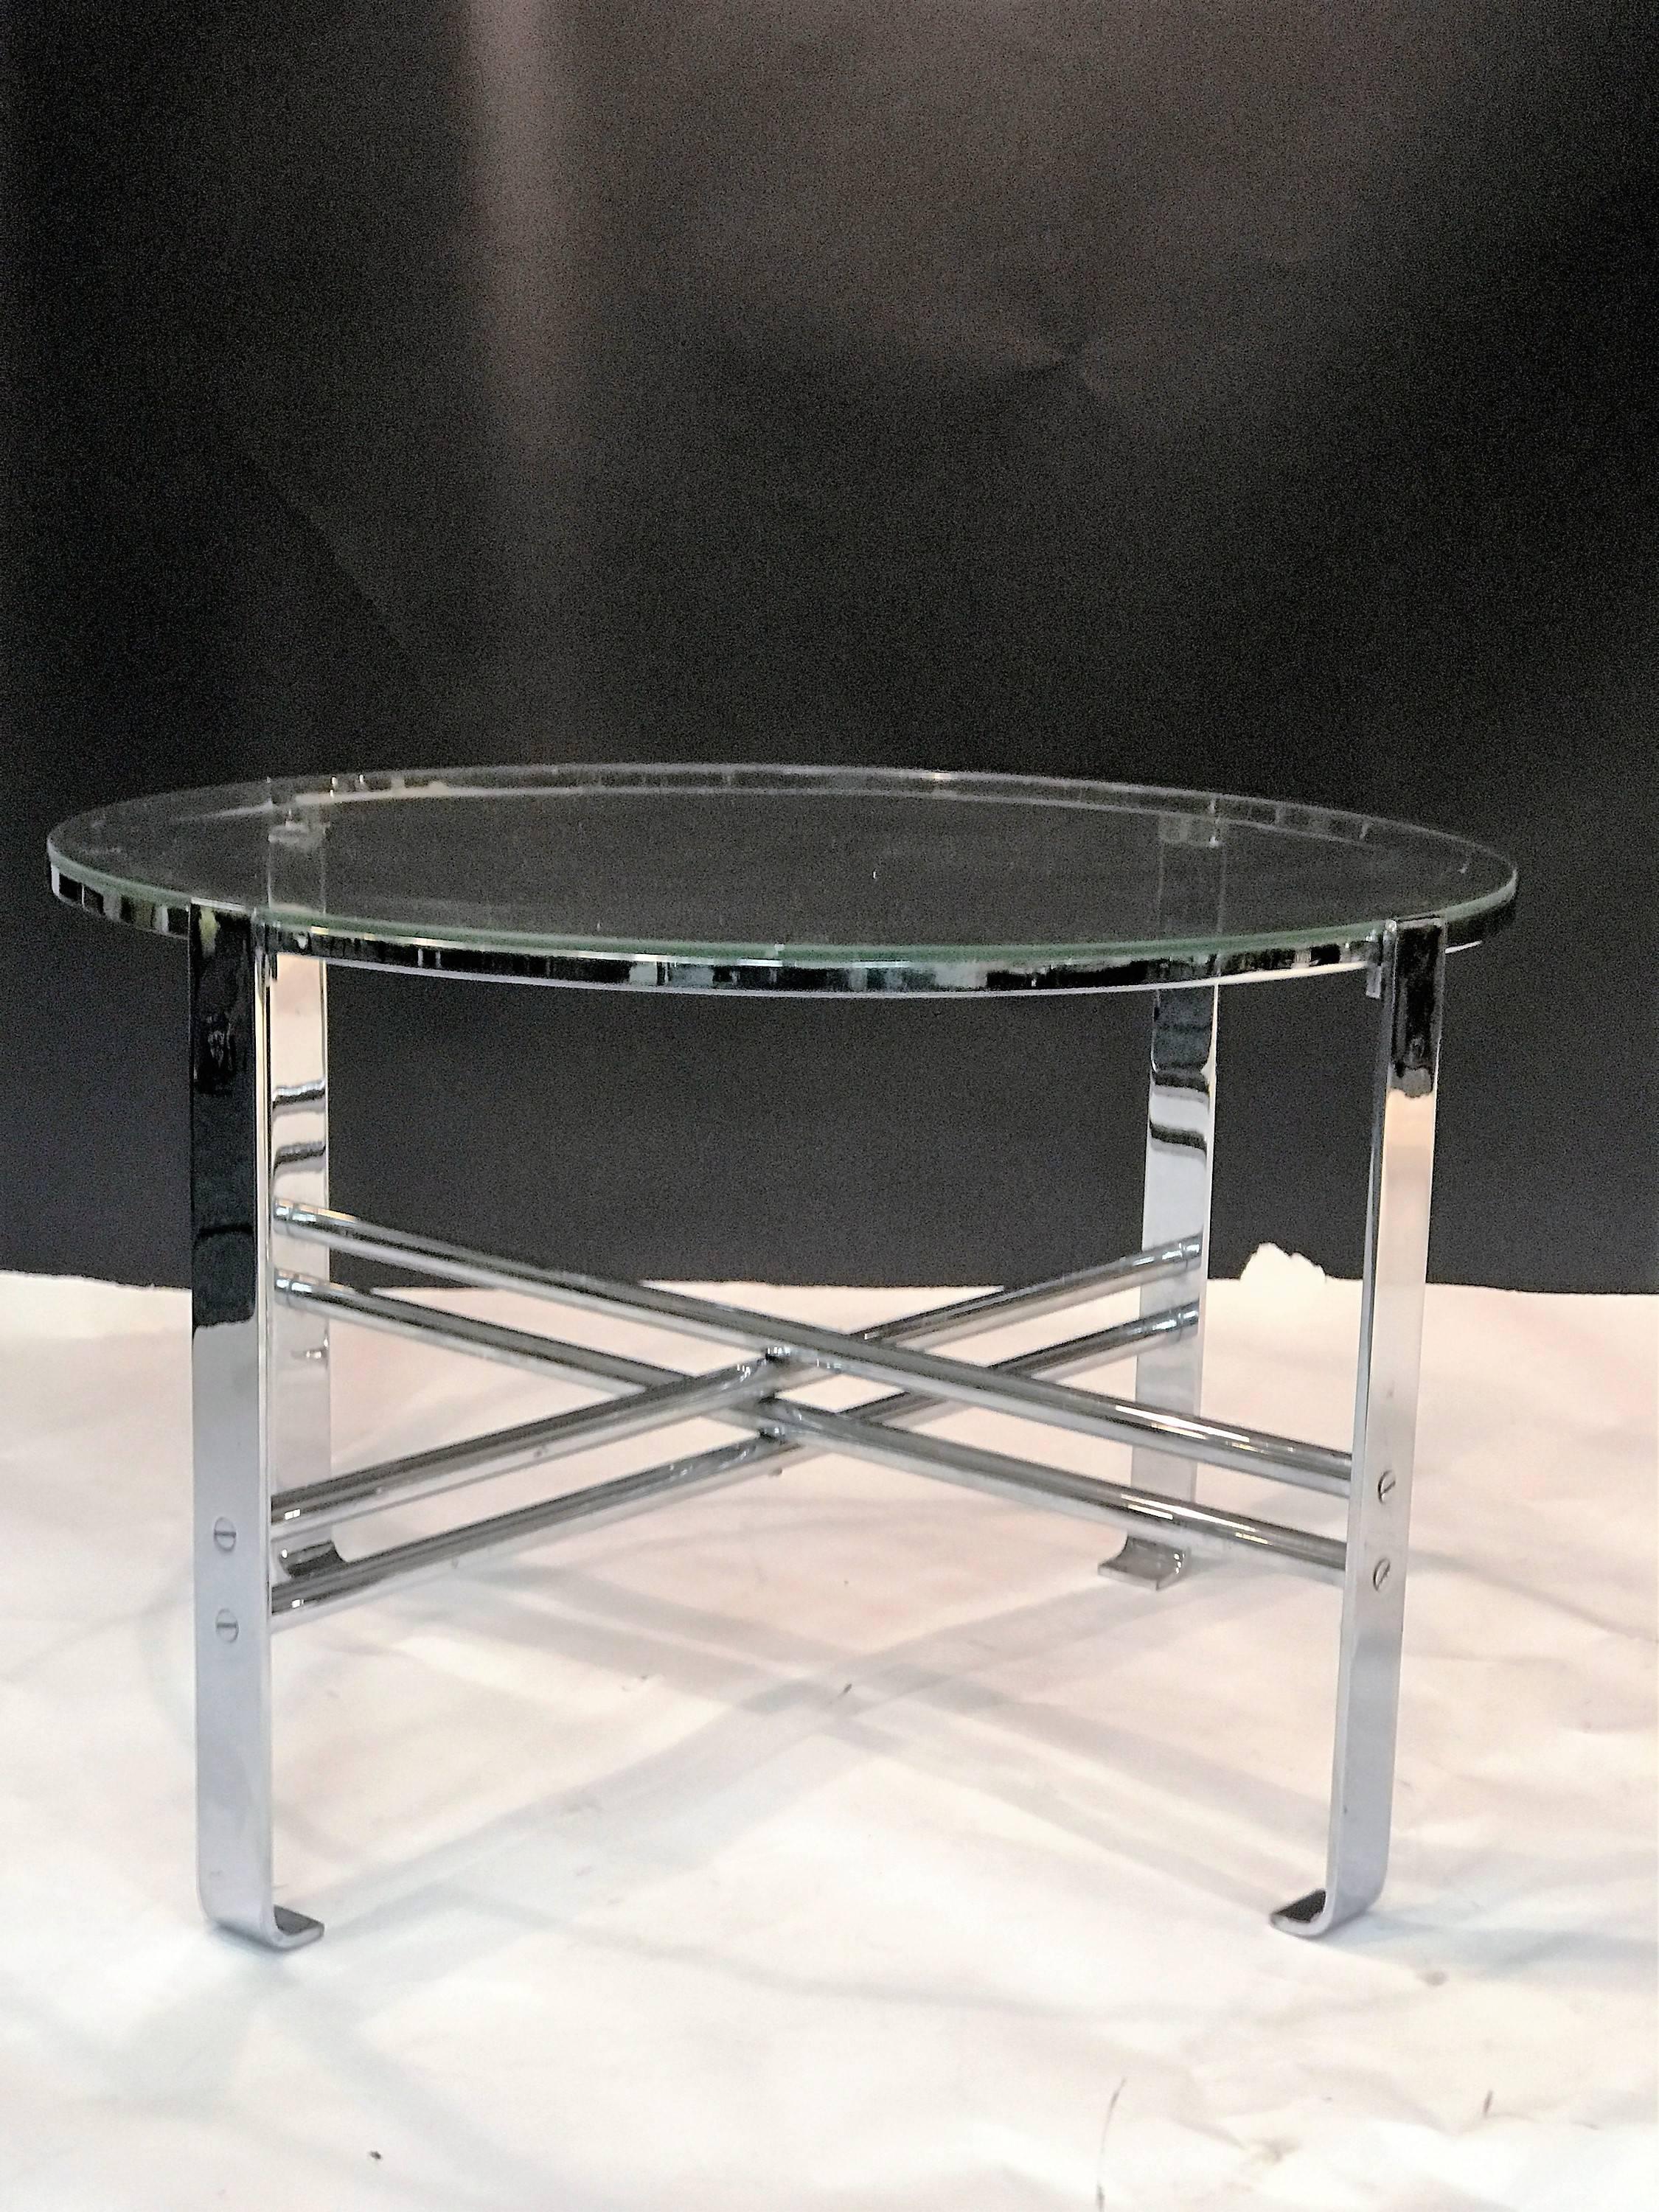 Great chrome metal flat band and tubular metal art deco table designed by modernist master Wolfgang Hoffman in the 1930s. Fantastic iconic design with the original glass top.